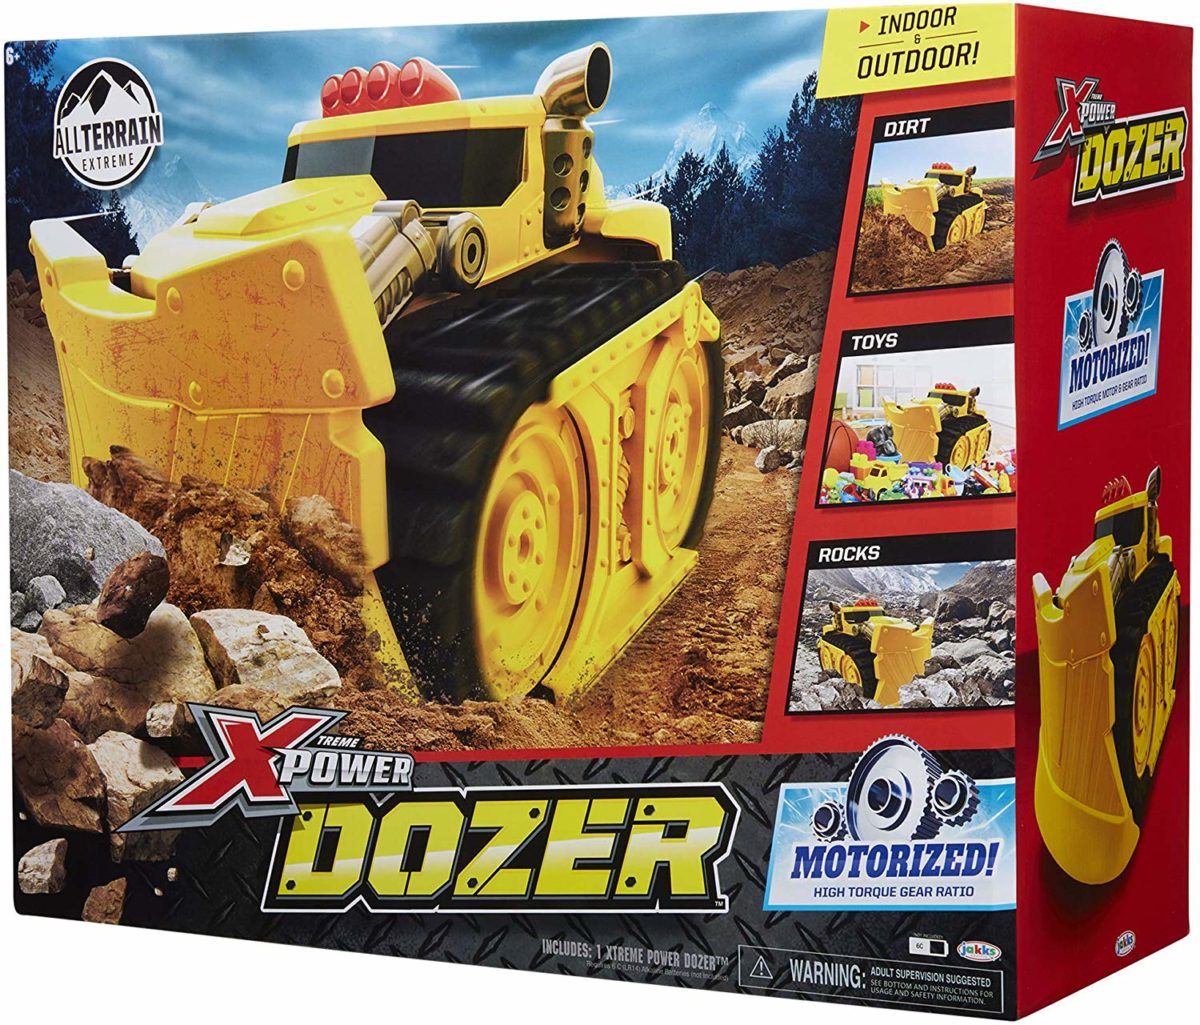 Xtreme Power Dozer Motorized Extreme Bulldozer Toy Truck - Top Toys and Gifts for Six Year Old Boys 2